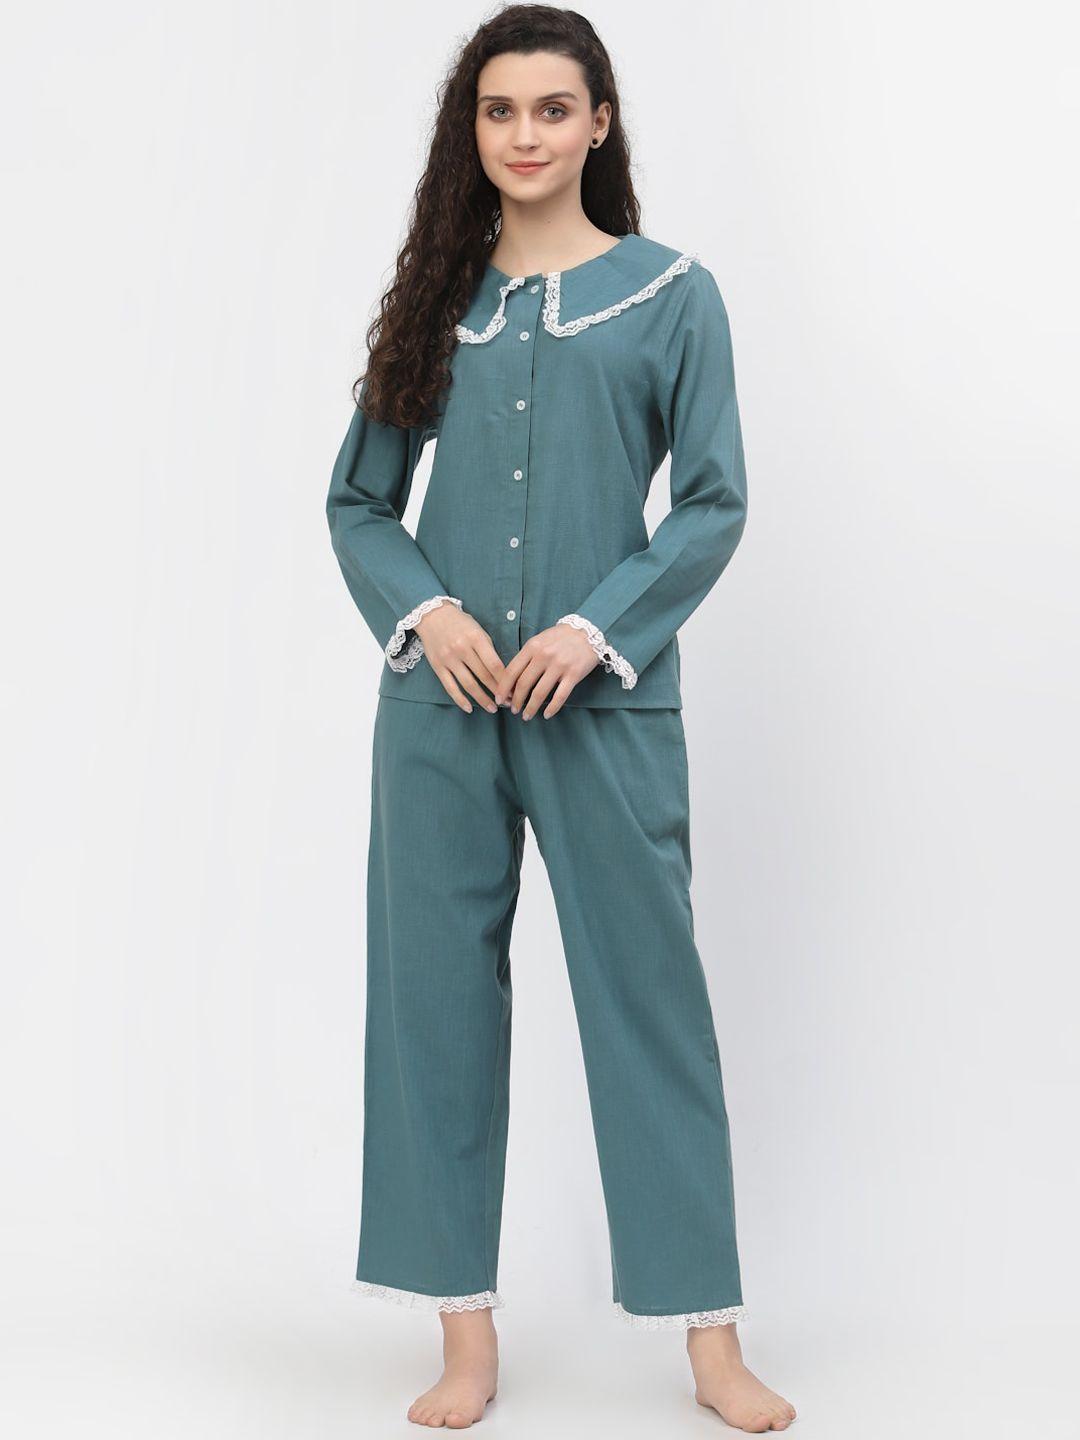 blanc9 women teal & white solid pure cotton night suit